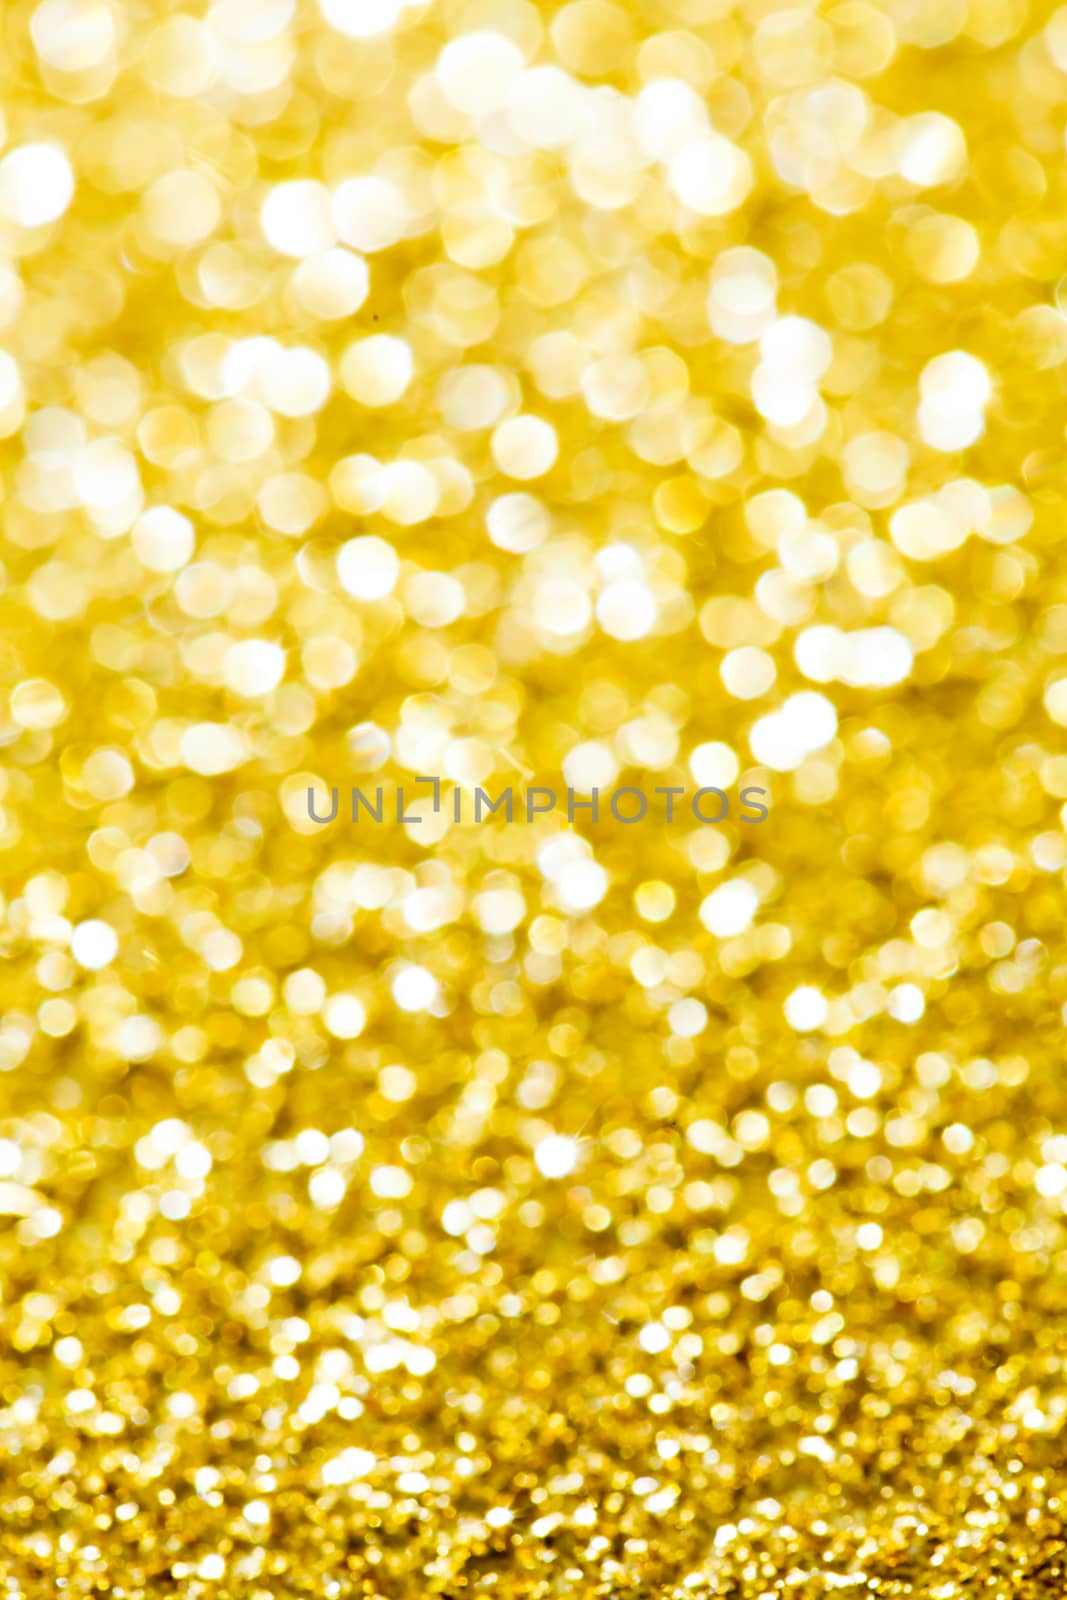 Abstract holidays golden lights on background